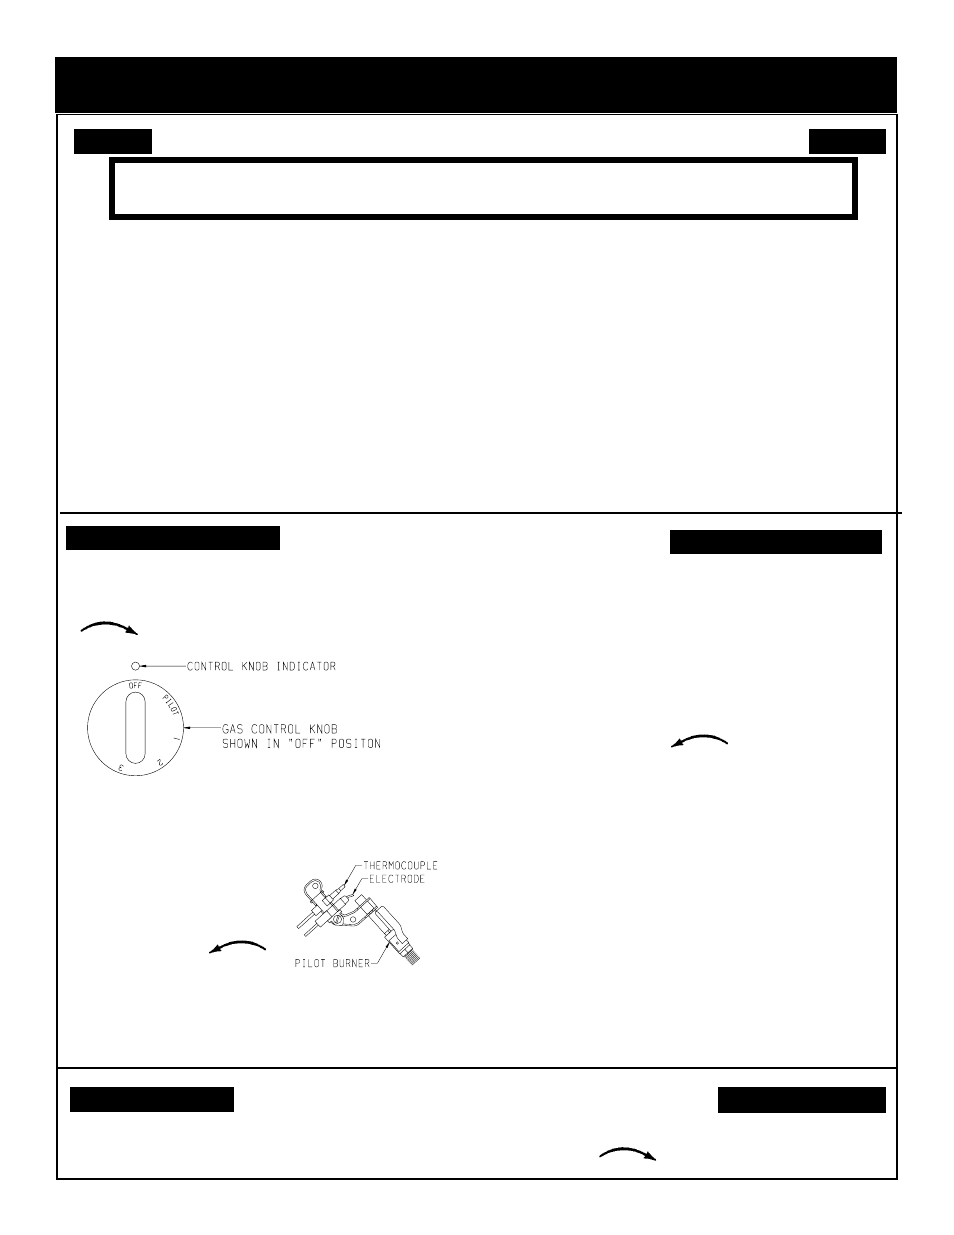 Lighting instructions | Empire Comfort Systems SR-18-3 User Manual | Page 13 / 48